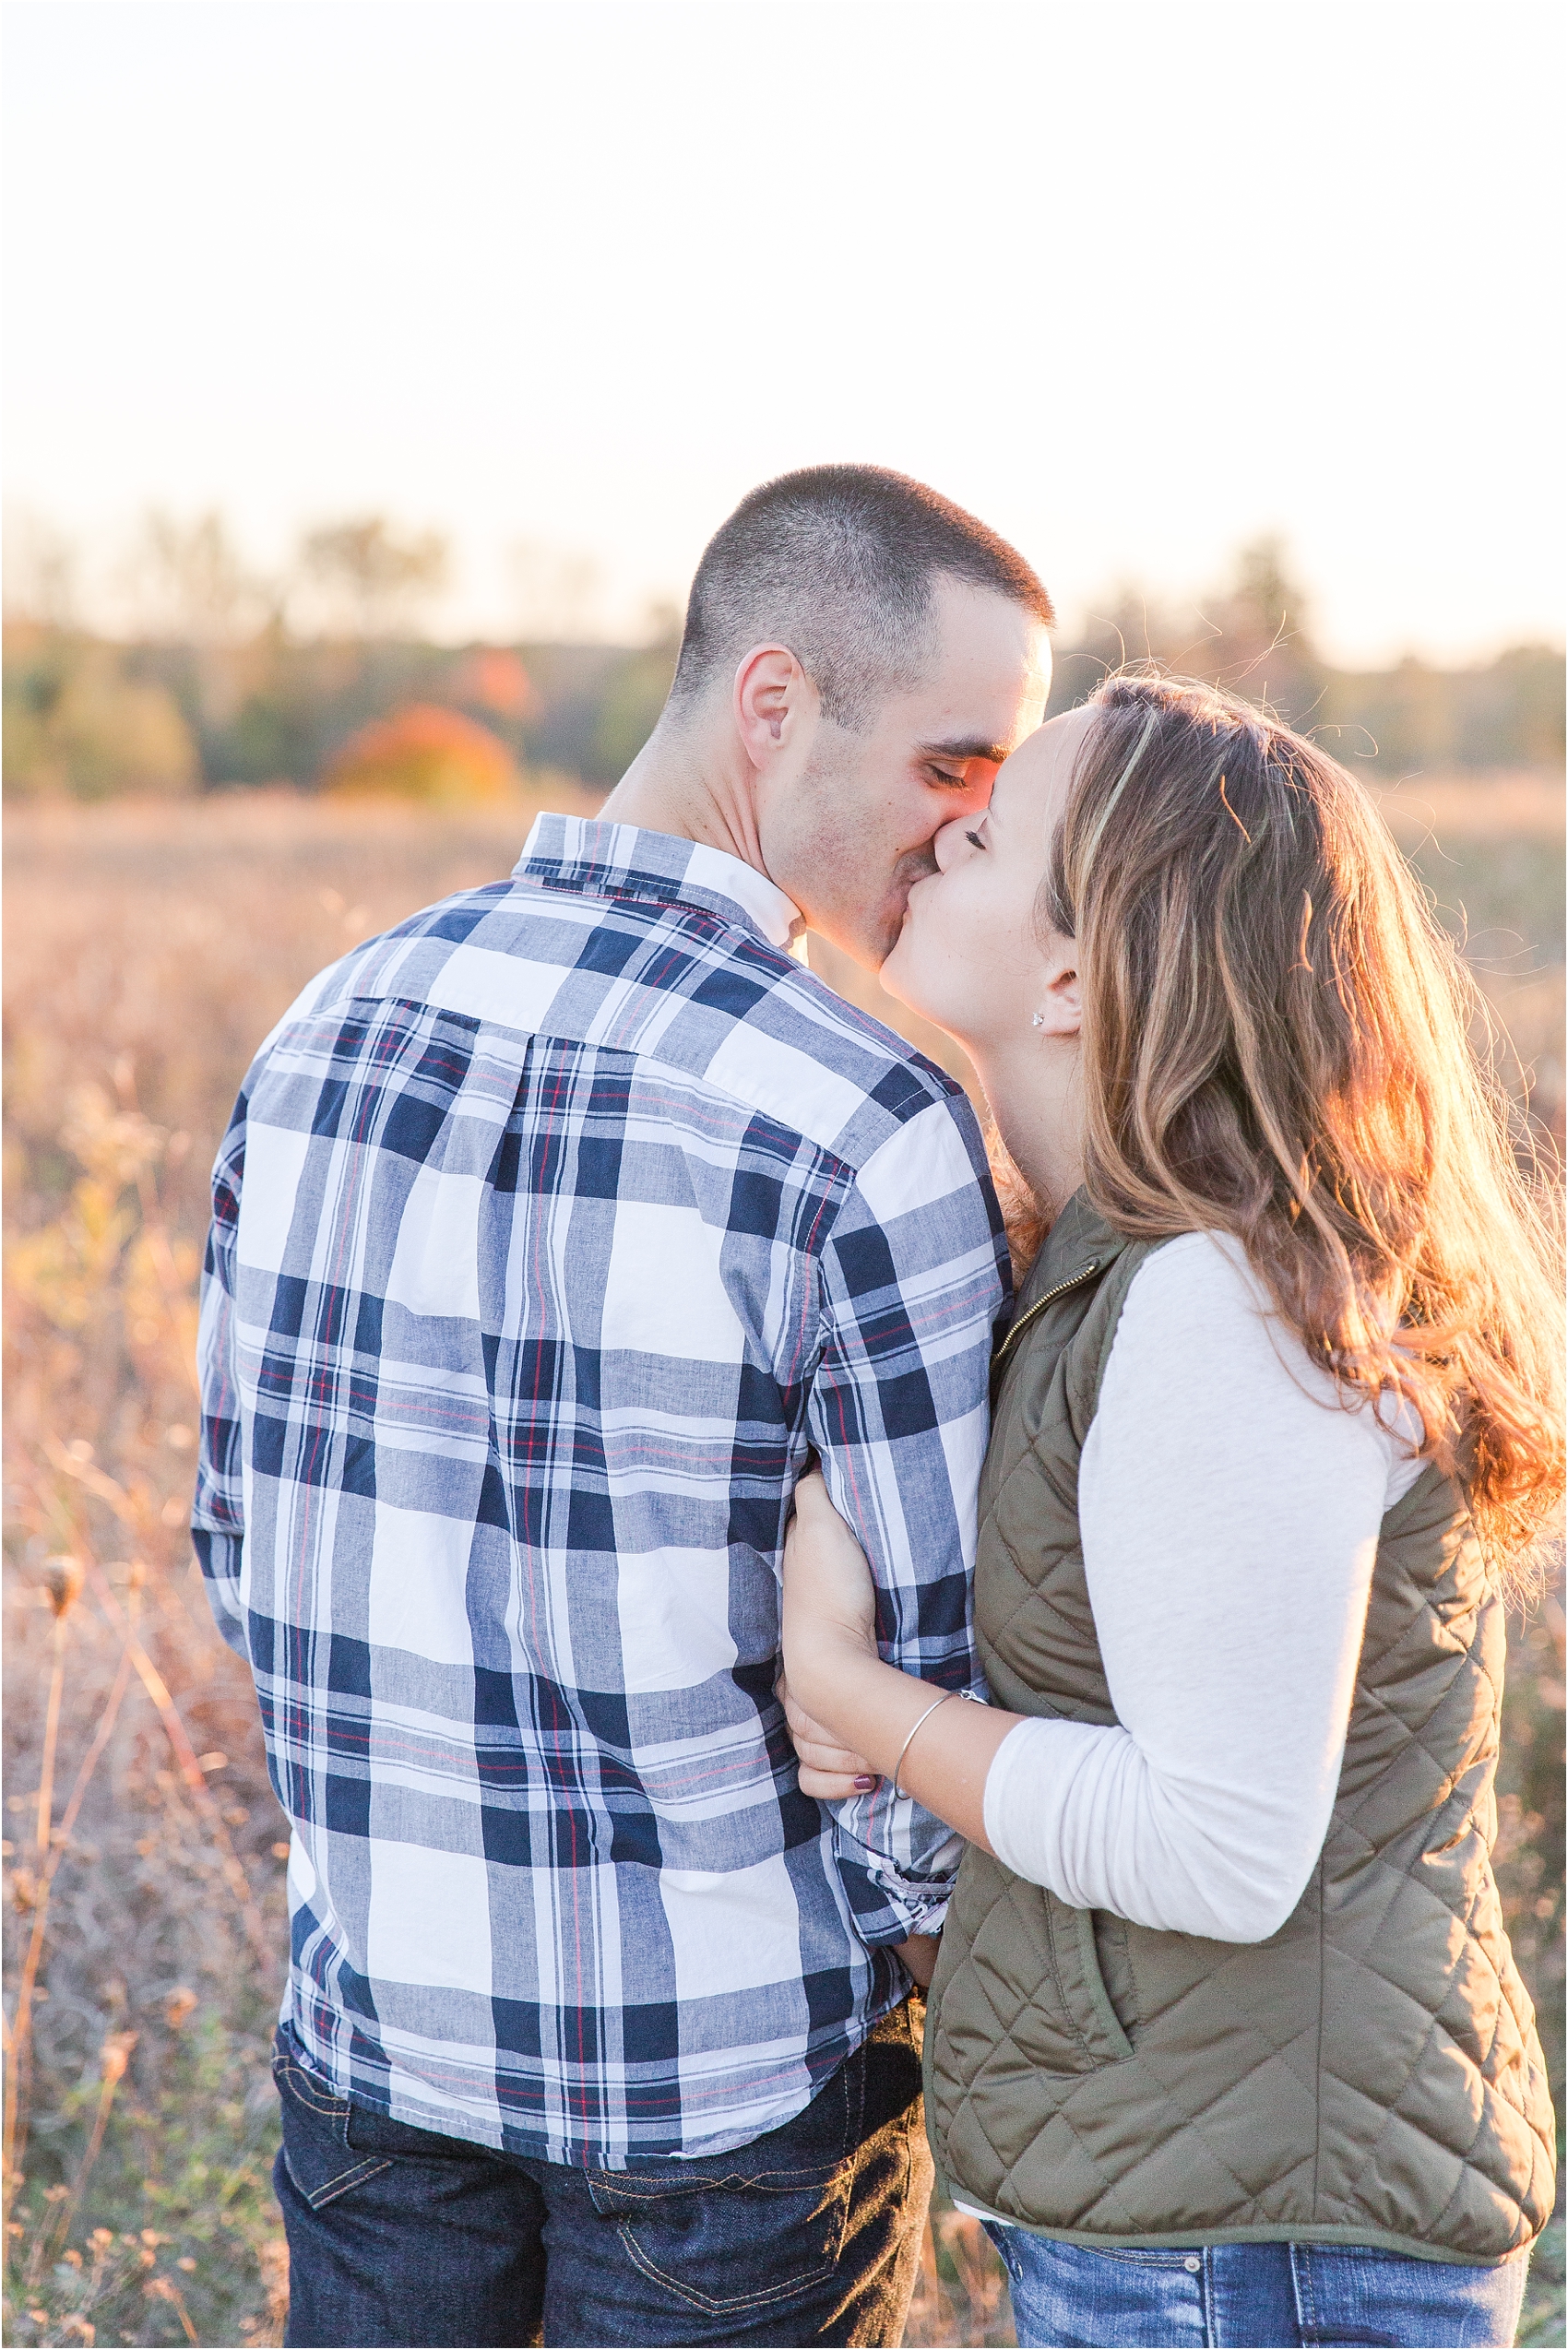 romantic-fall-engagement-photos-at-indian-springs-metropark-in-clarkston-mi-by-courtney-carolyn-photography_0030.jpg